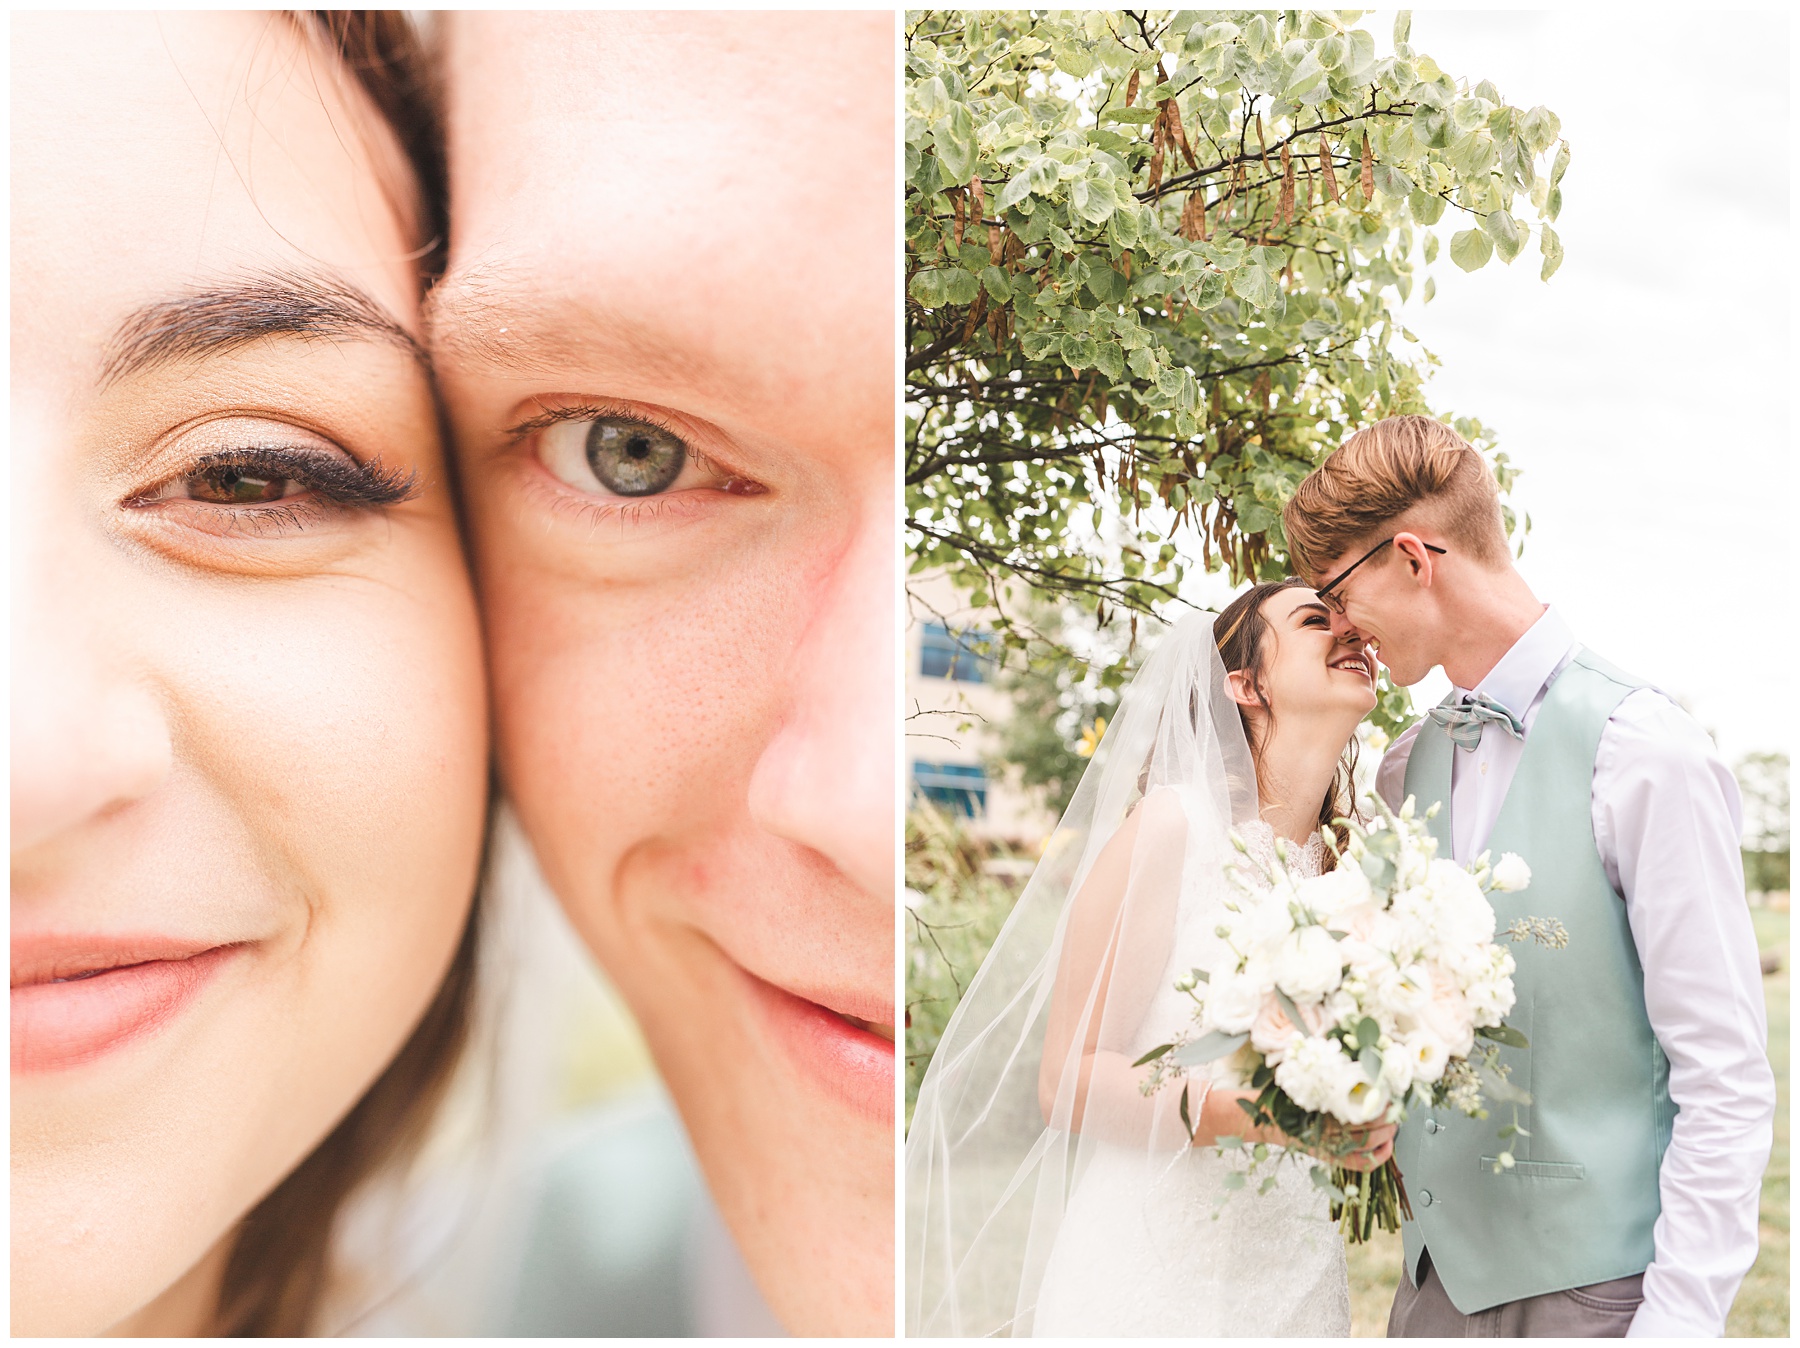 Instagram eye trend with bride and groom Cloudy wedding day